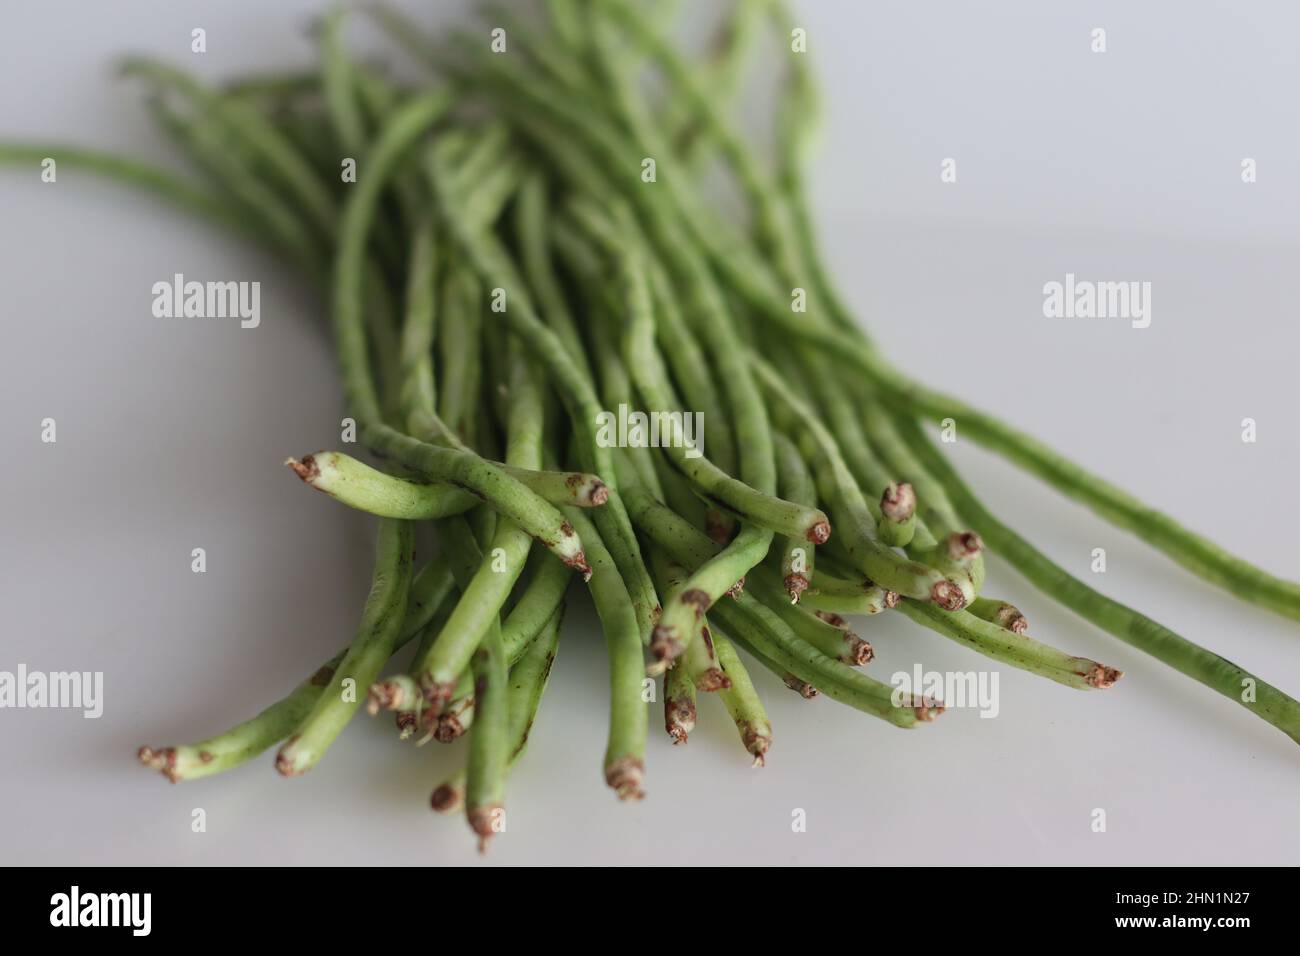 Bunch of Long beans. It is also known as the long podded cowpea, asparagus bean, snake bean or Chinese long bean. Shot on white background Stock Photo